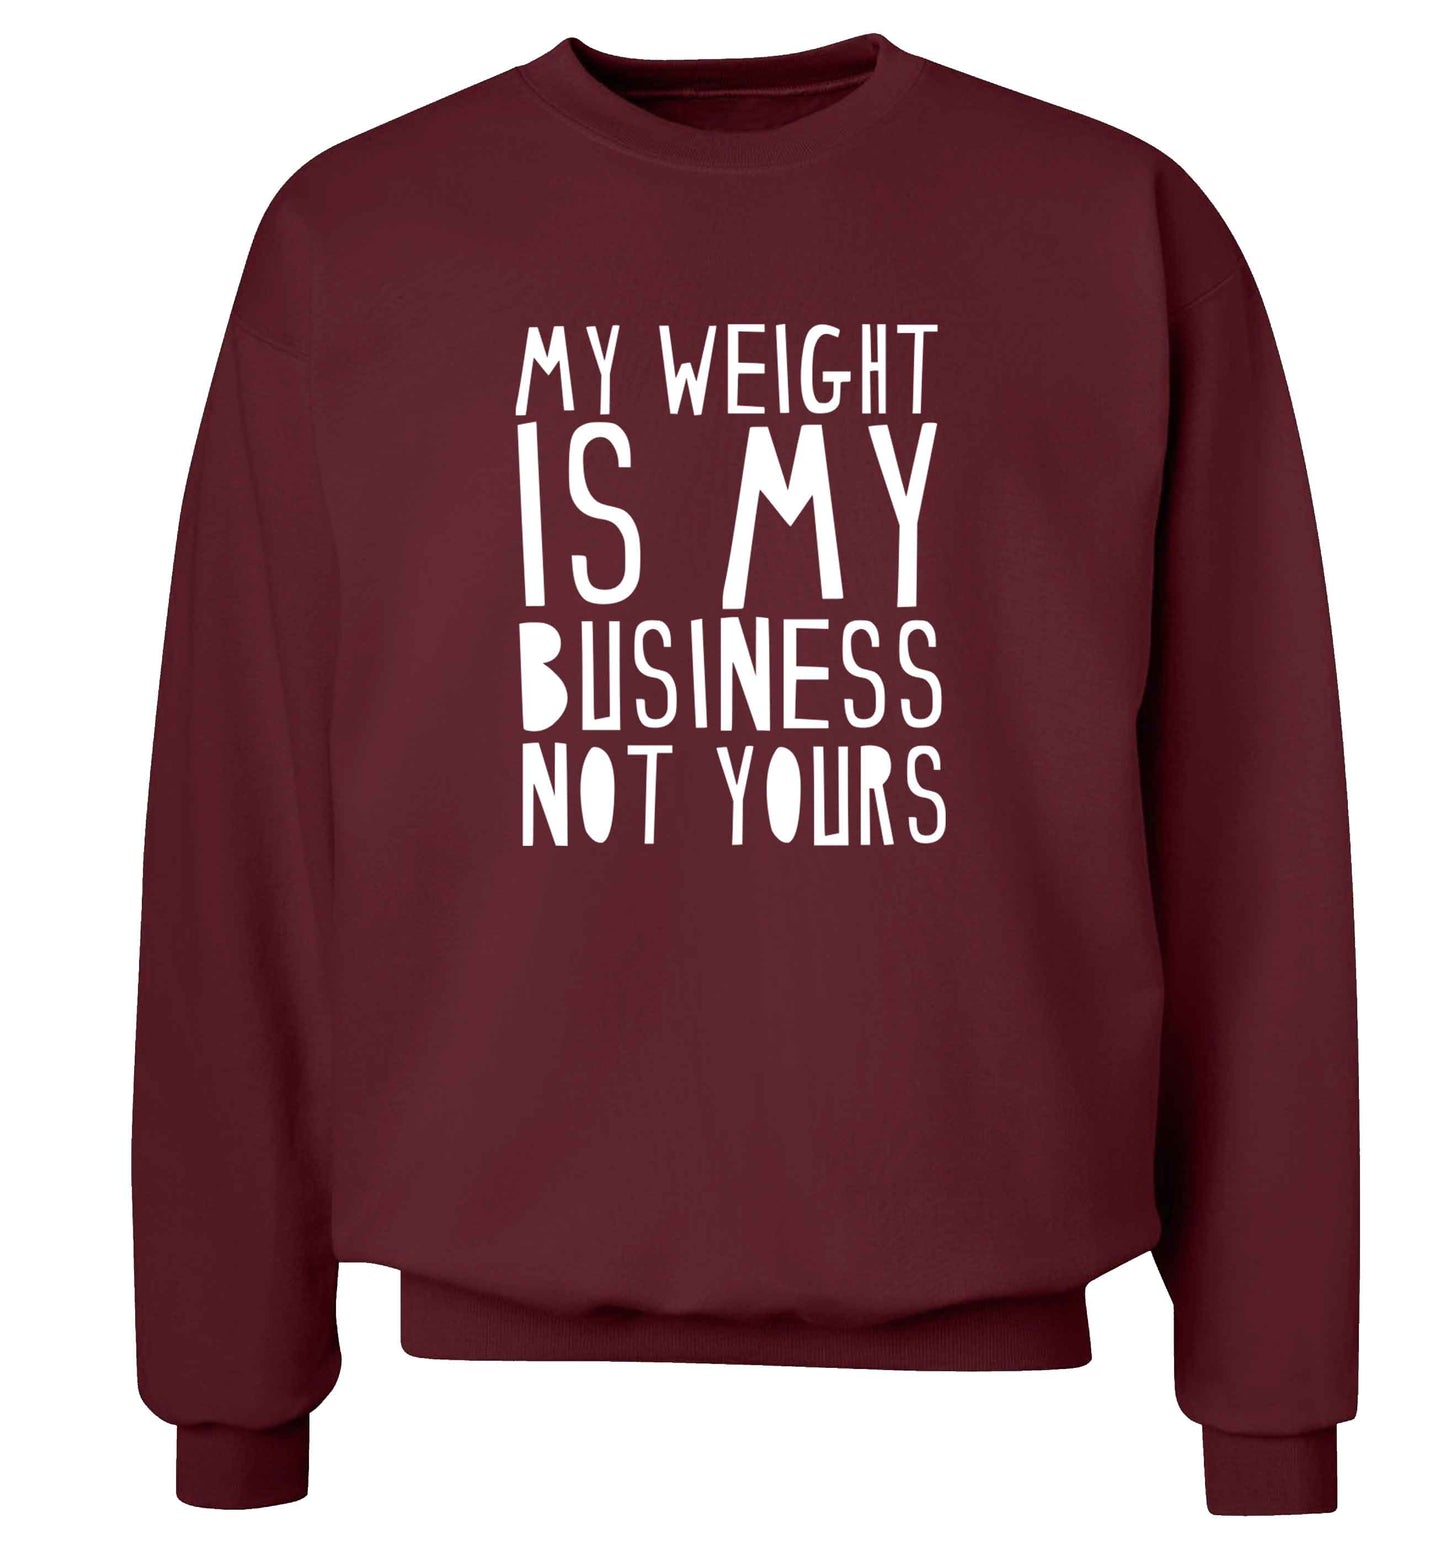 My weight is my business not yours adult's unisex maroon sweater 2XL